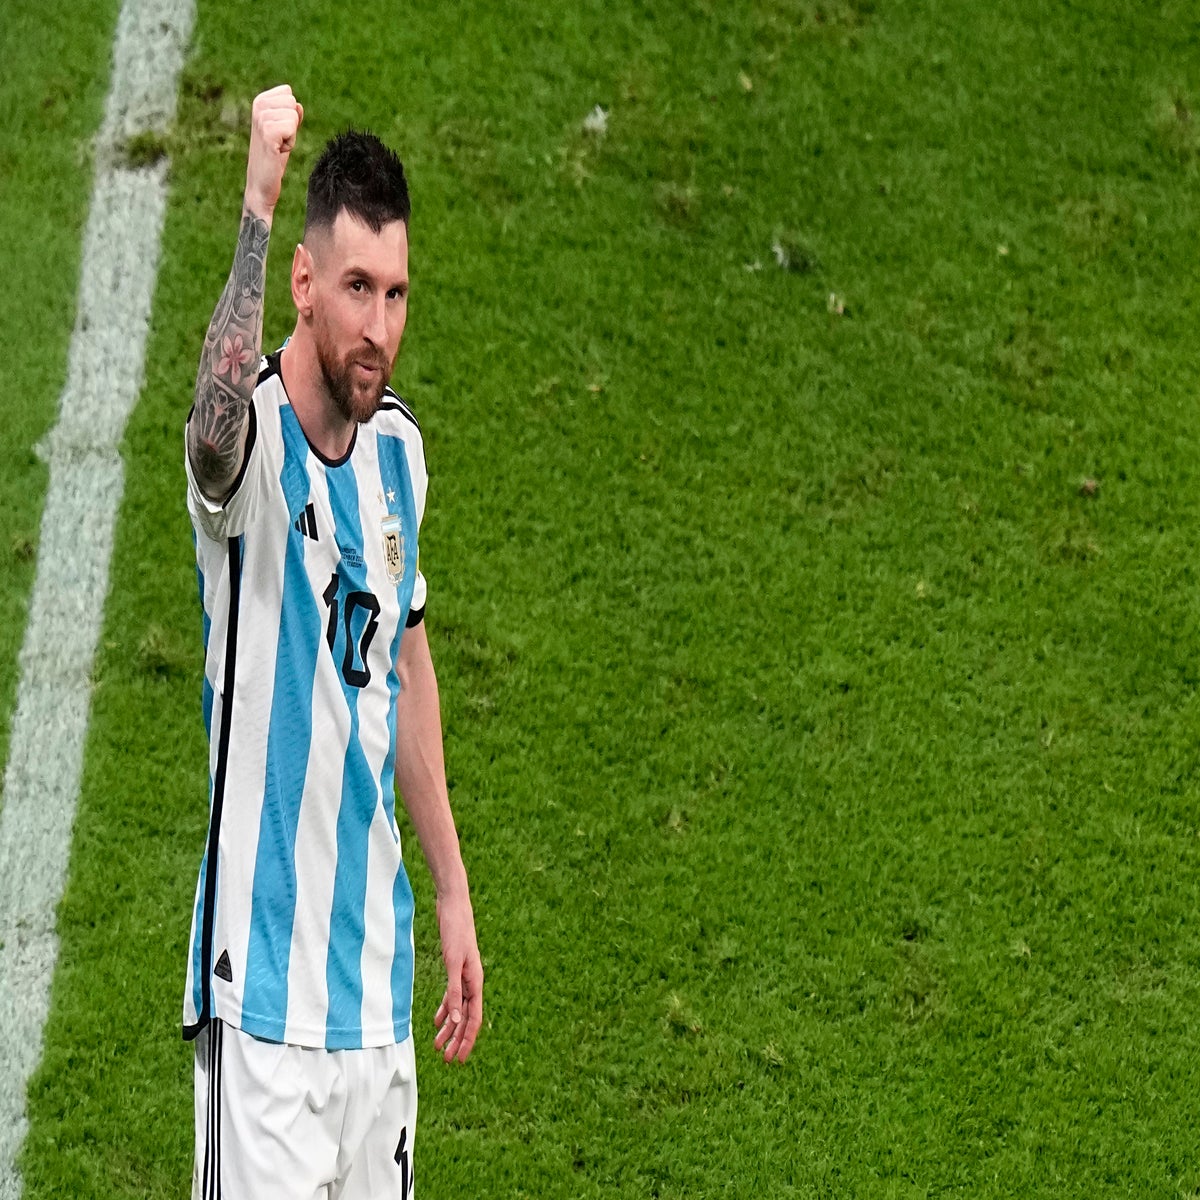 Forget the emotions, Lionel Messi isn't the Greatest Of All Time